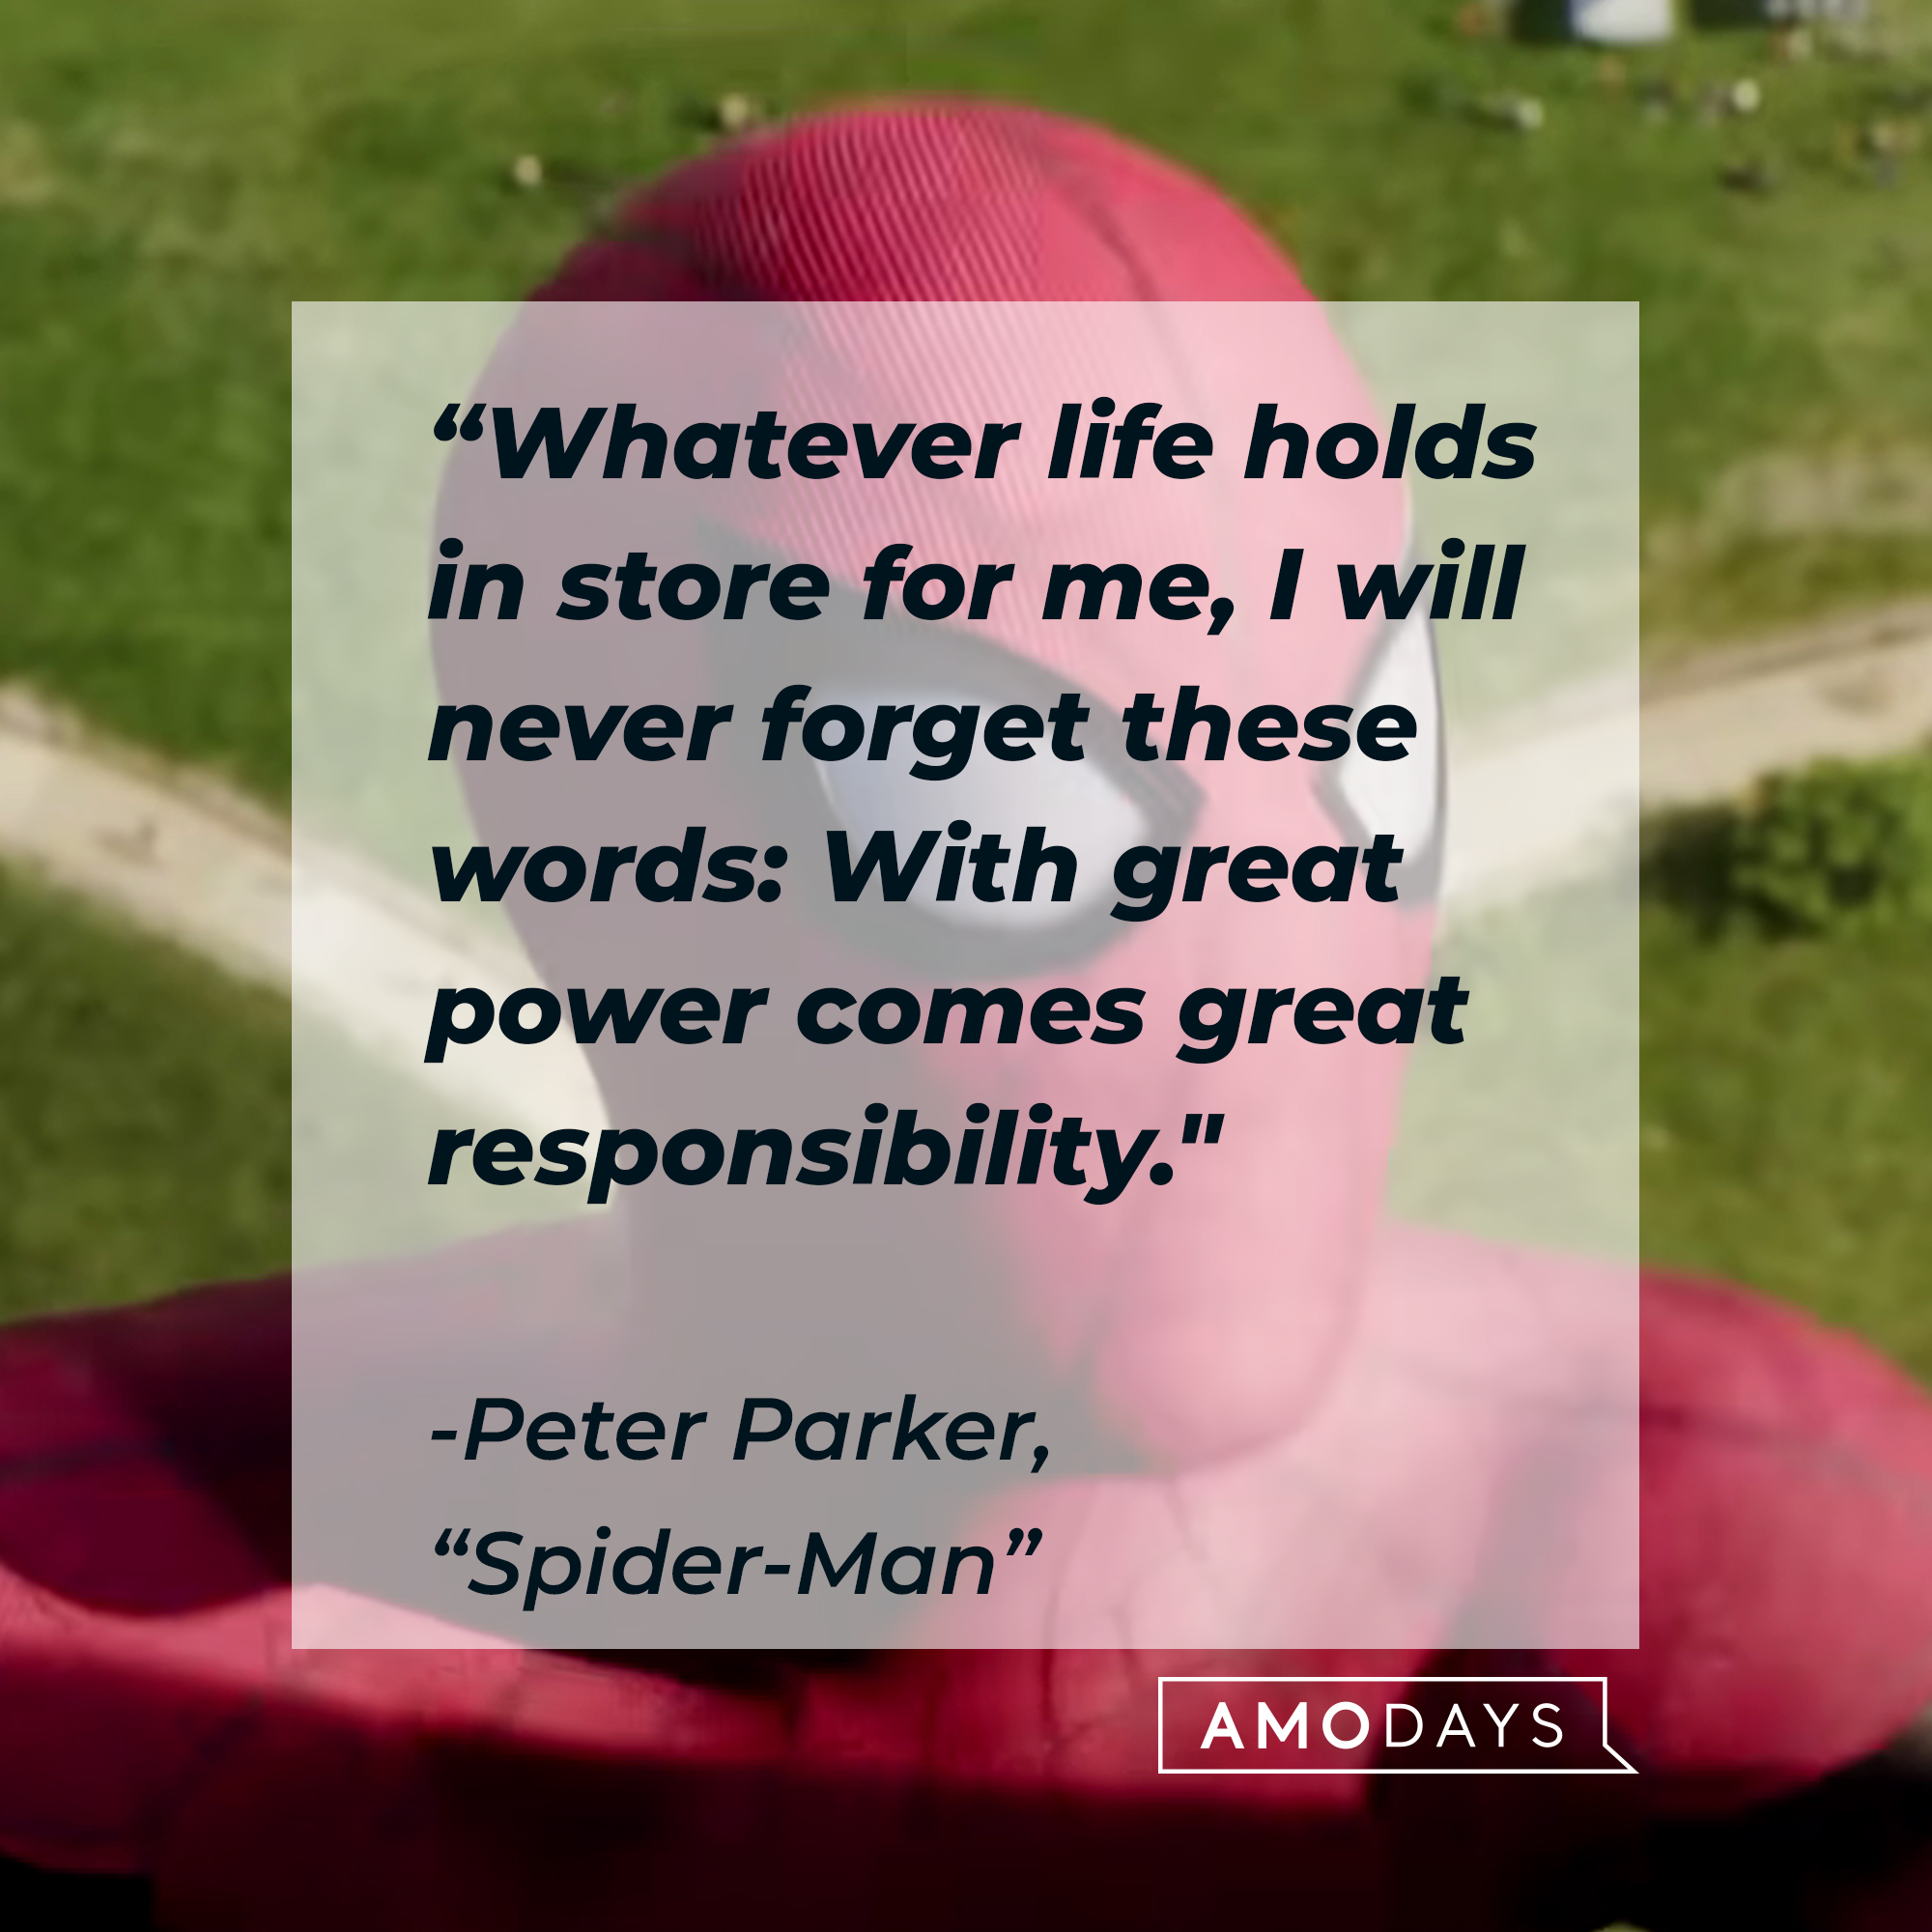 Spider-Man's quote from "Spider-Man:" “Whatever life holds in store for me, I will never forget these words: With great power comes great responsibility." | Source: Facebook.com/SpiderManMovie